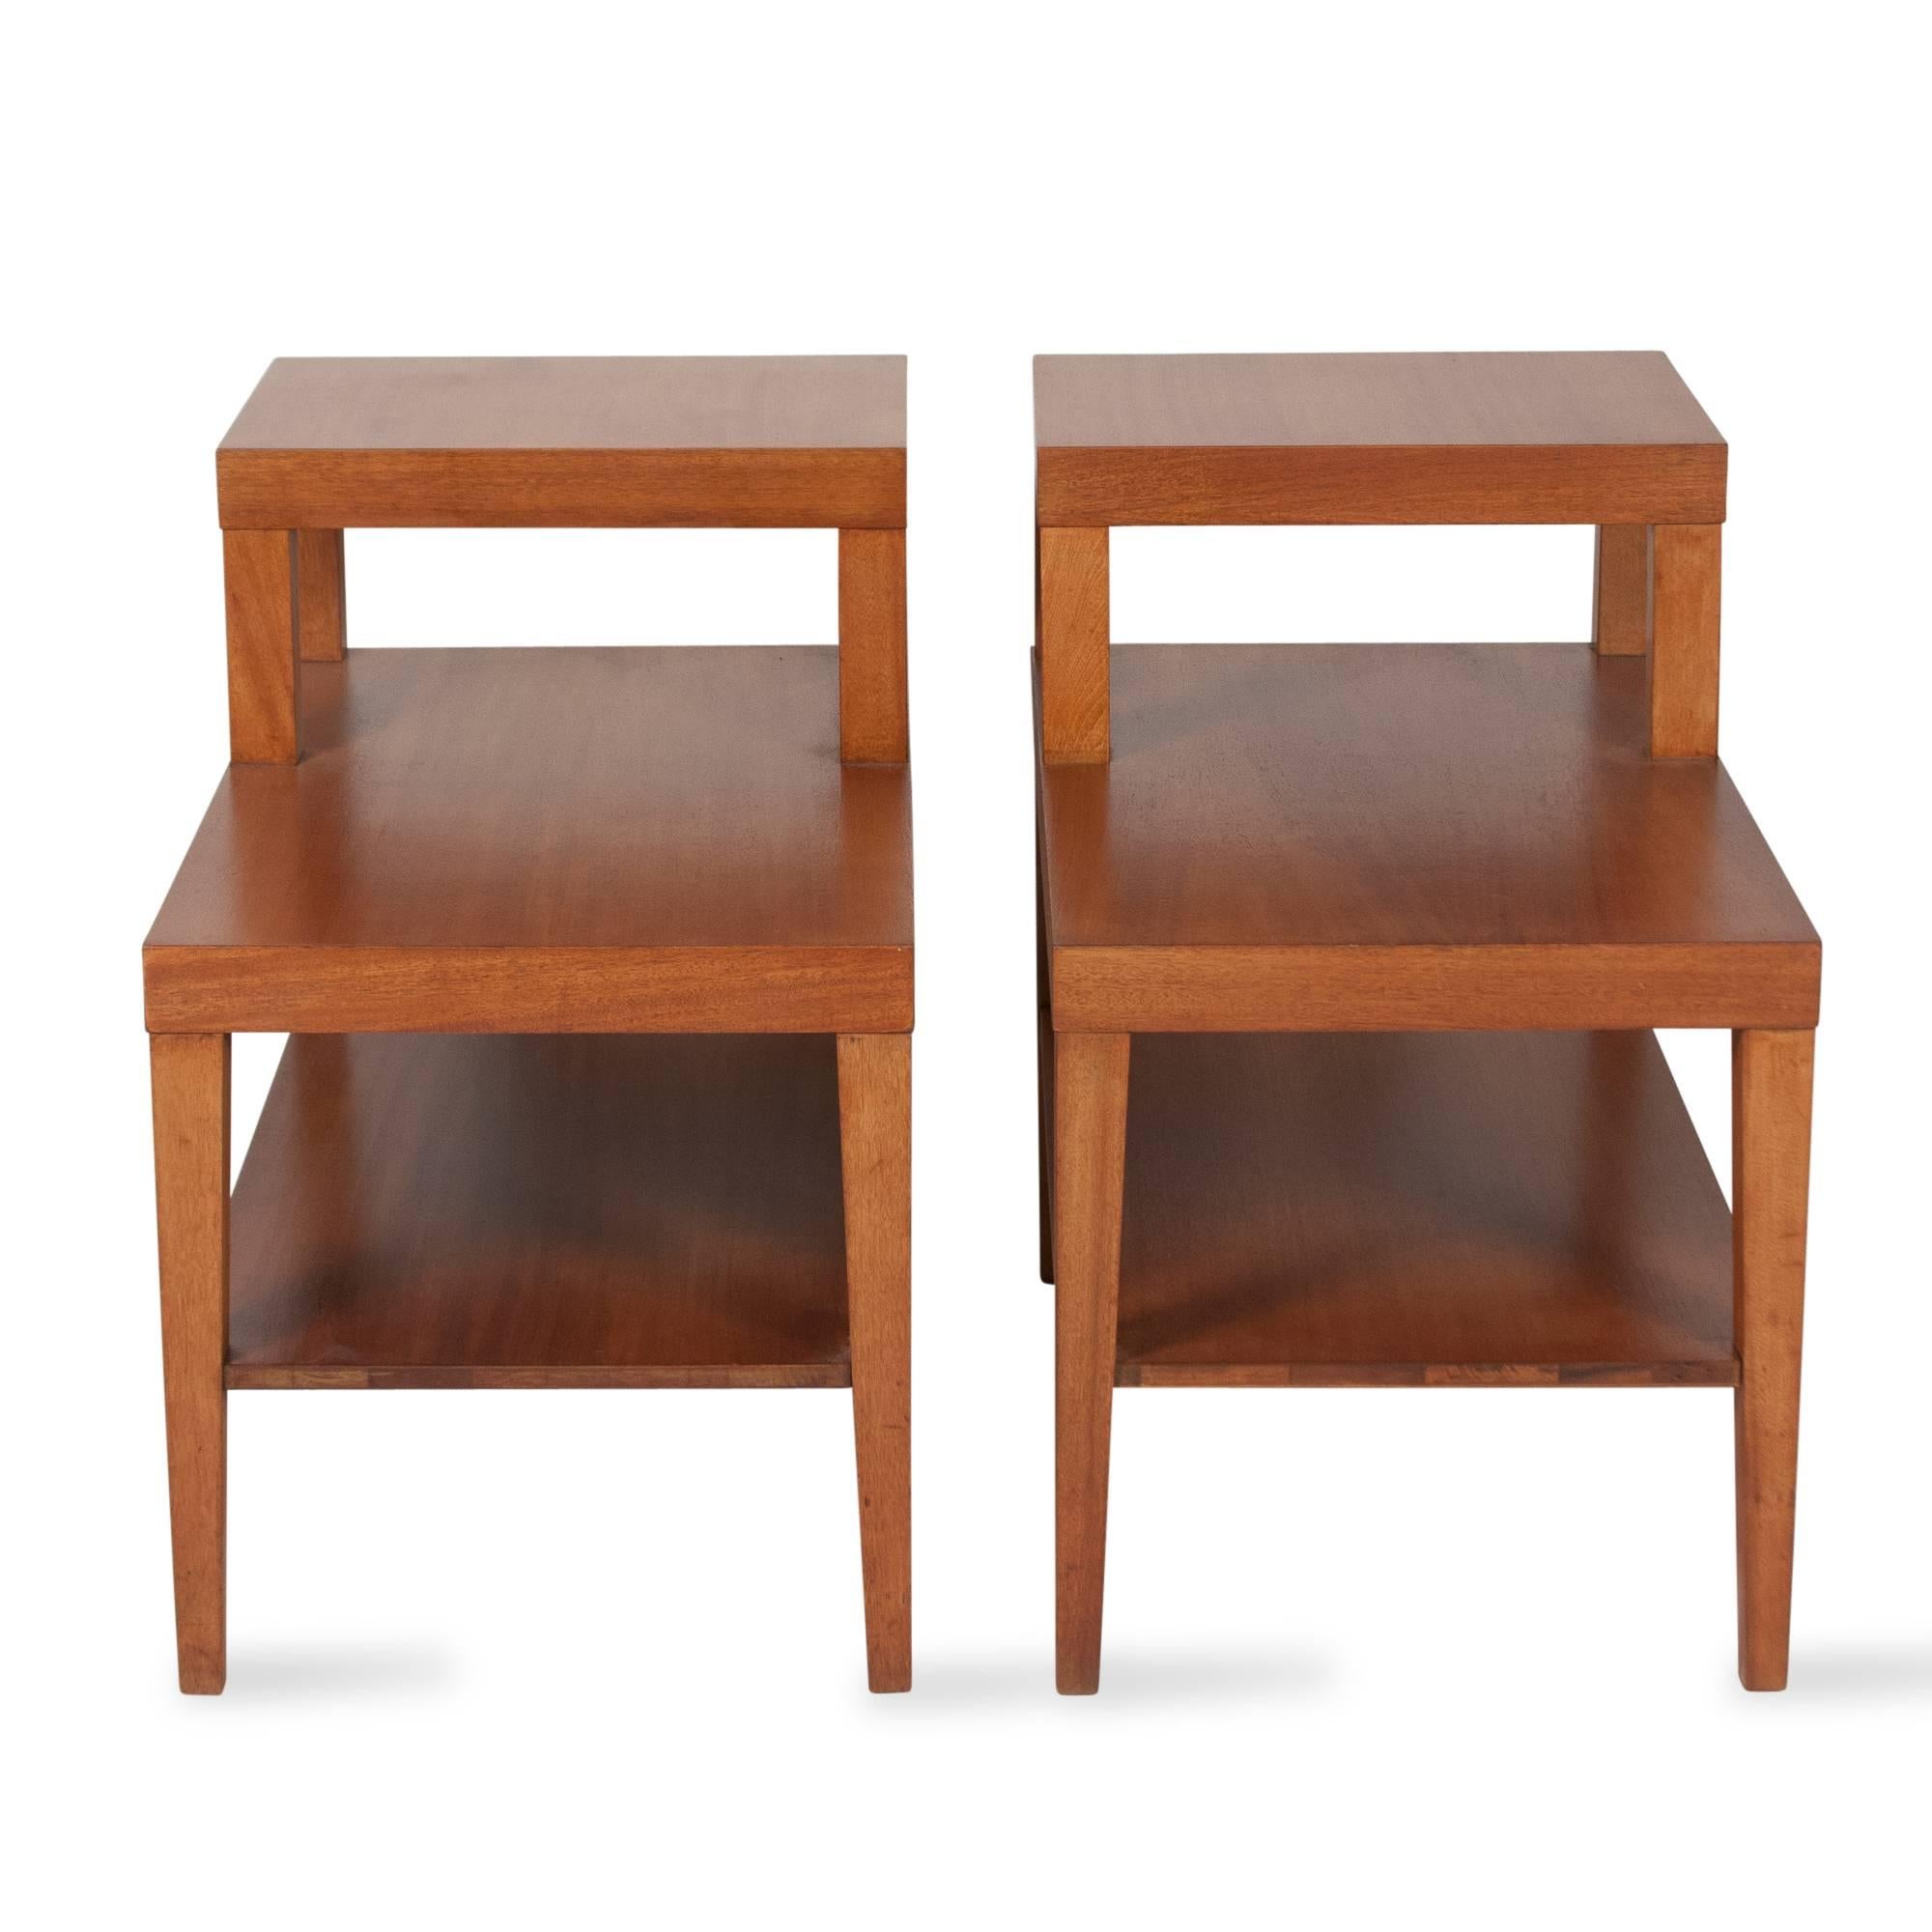 Pair of Walnut Tiered End Tables, American, 1960s 2